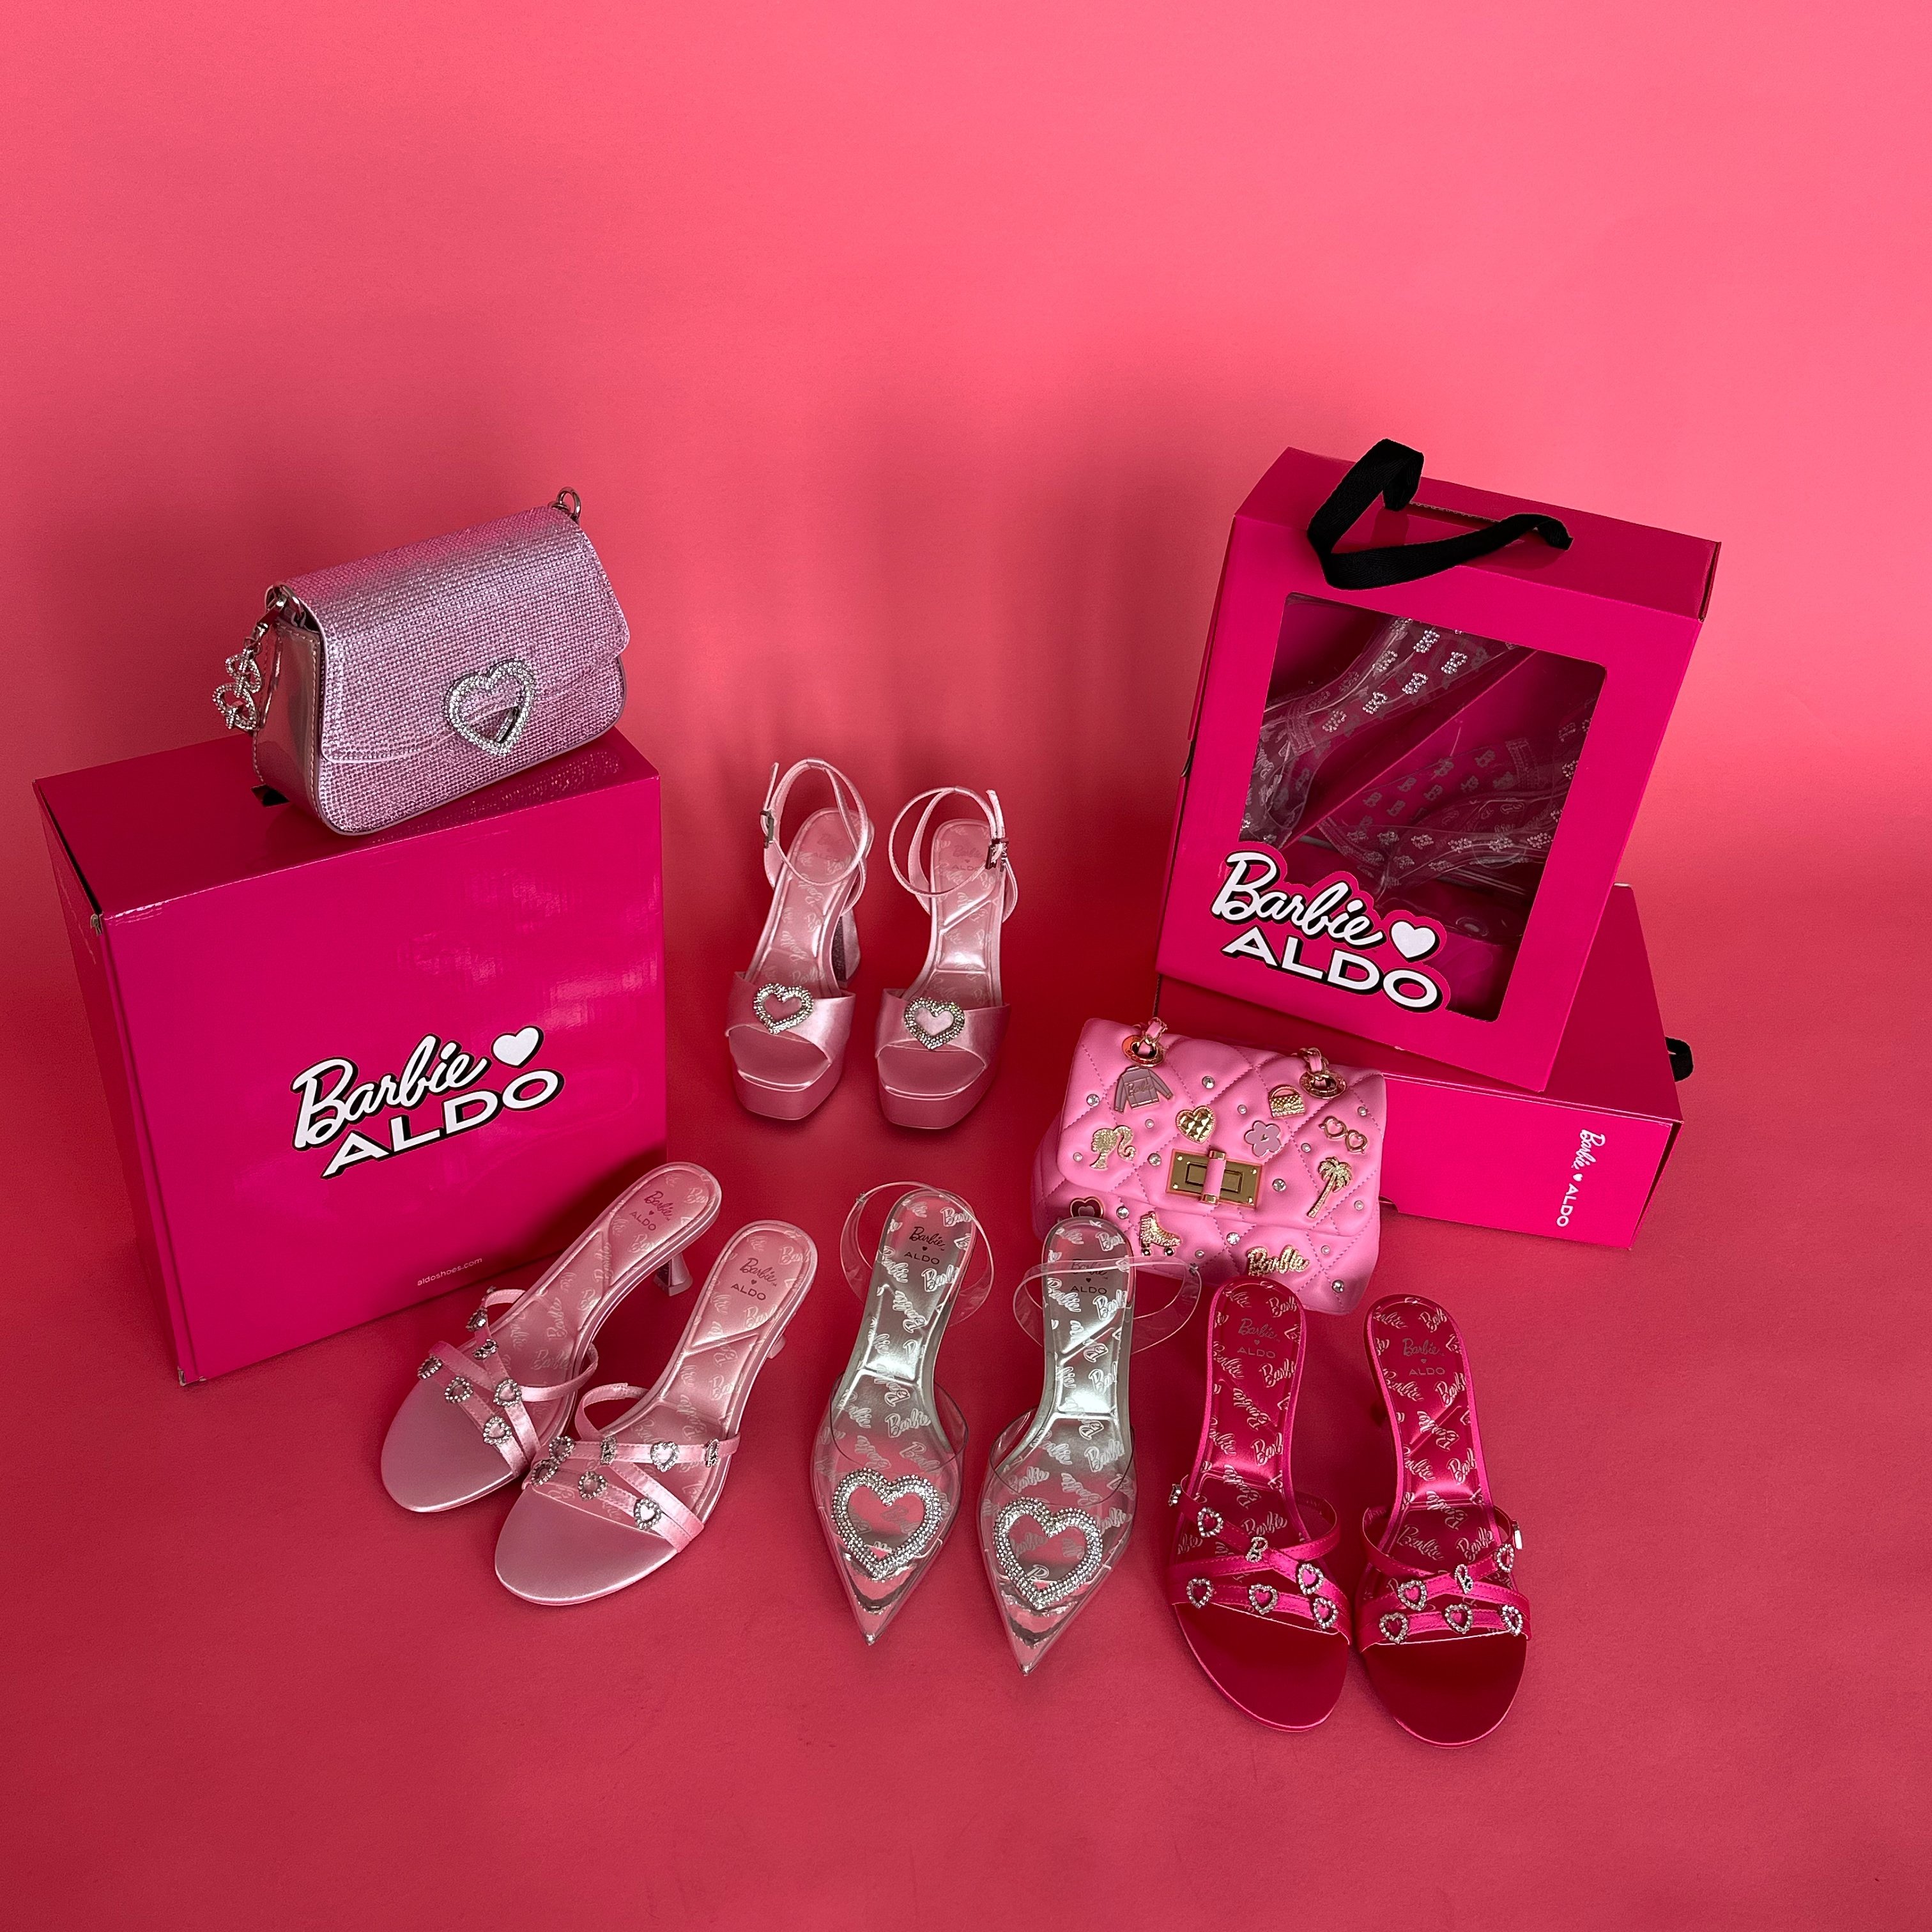 ALDO Shoes on X: "Category is: Barbie-core 💕 iconic #BarbiexALDO styles from our limited-edition collection, dropping tomorrow. Sign up for early access to shop today at https://t.co/HWyLgHnIsn https://t.co/K9hGx6di2l" / X